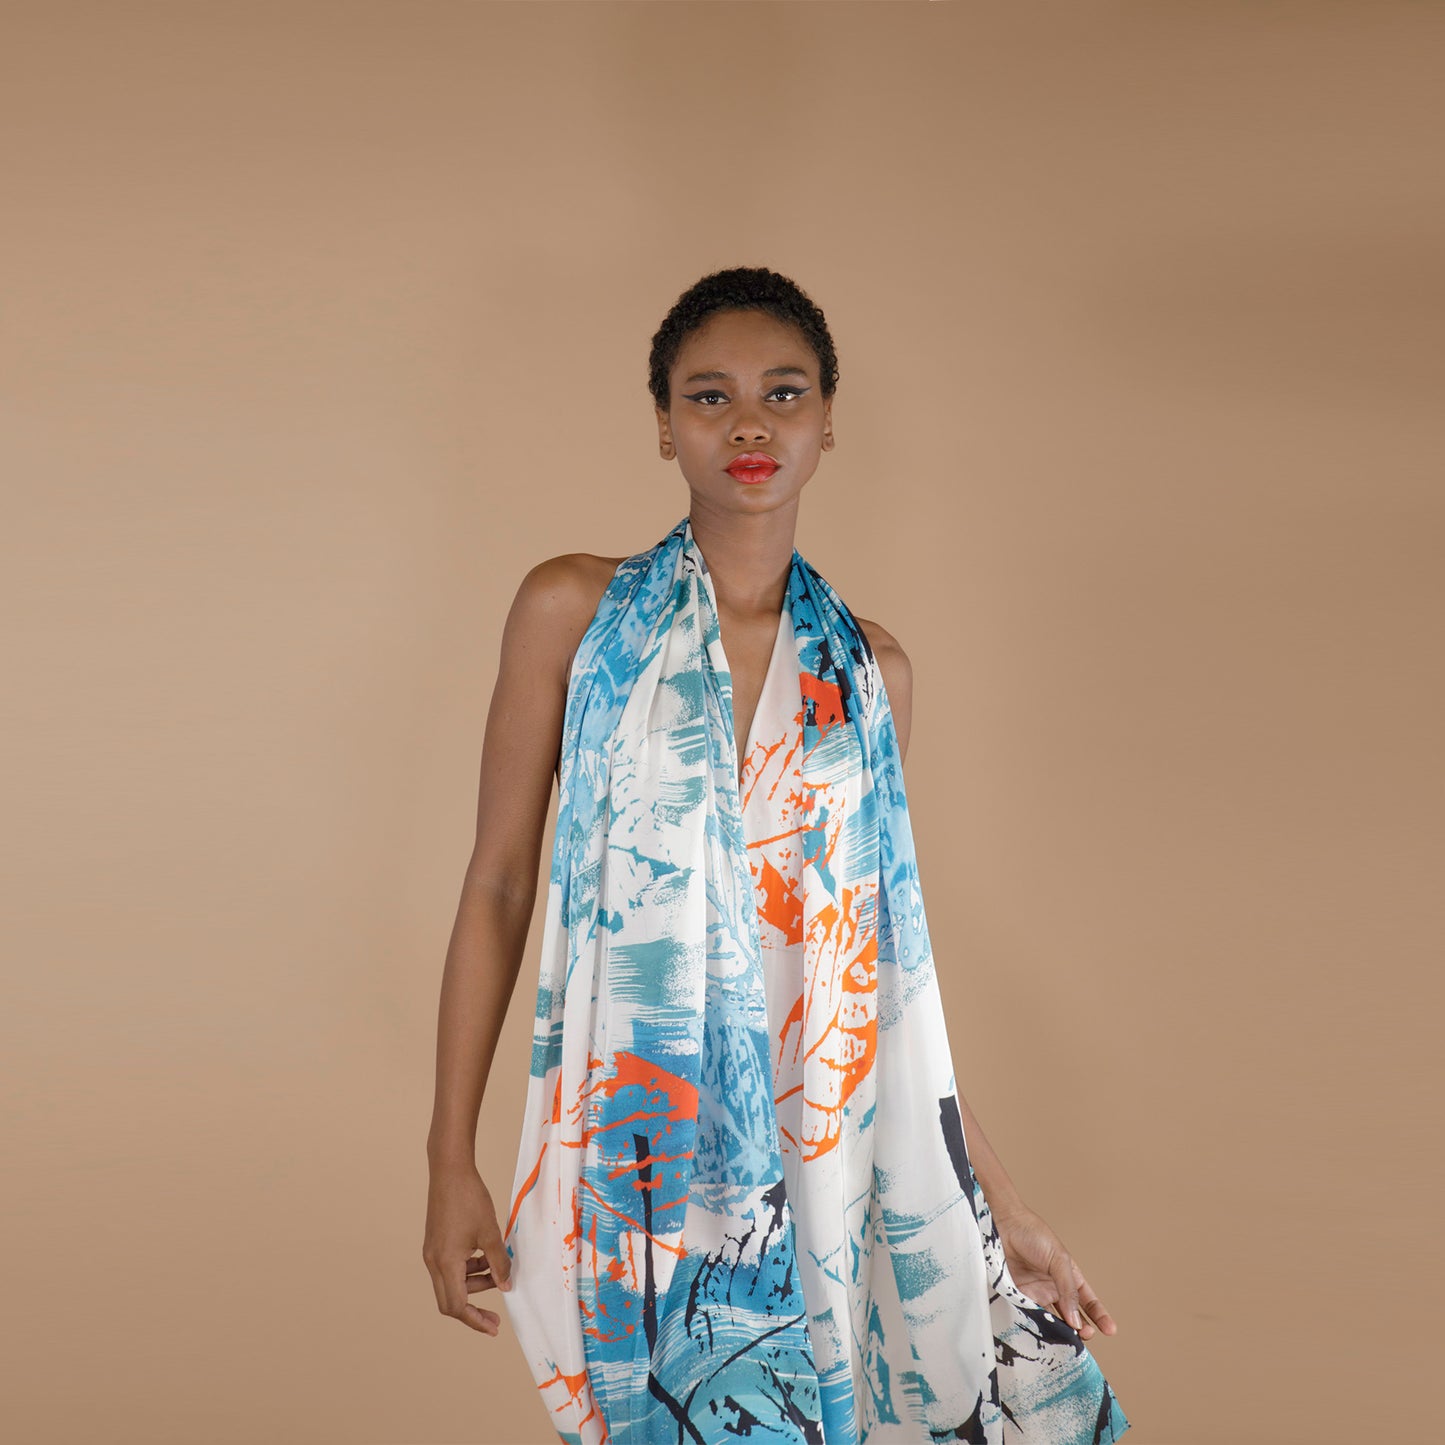 Global Small Size Model Wearing printed Rose Petal Fabric Scarf. The scarf is printed in Shade of Blue orange and white with hand painted leafy print. 